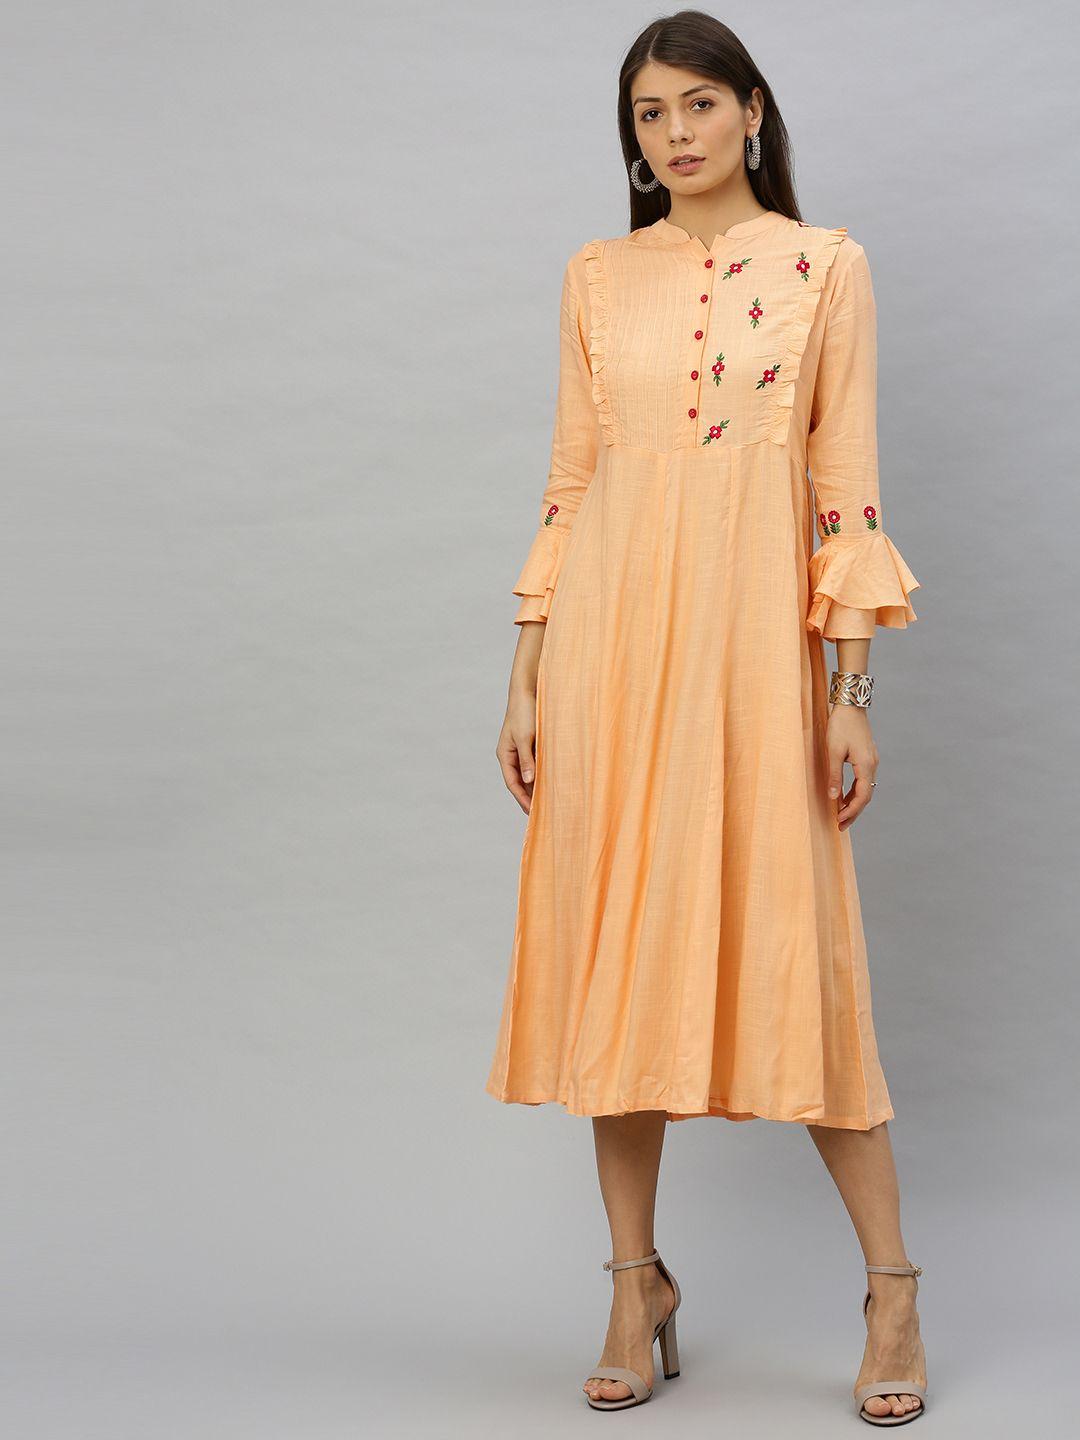 yash-gallery-women-cream-coloured-embroidered-fit-and-flare-dress